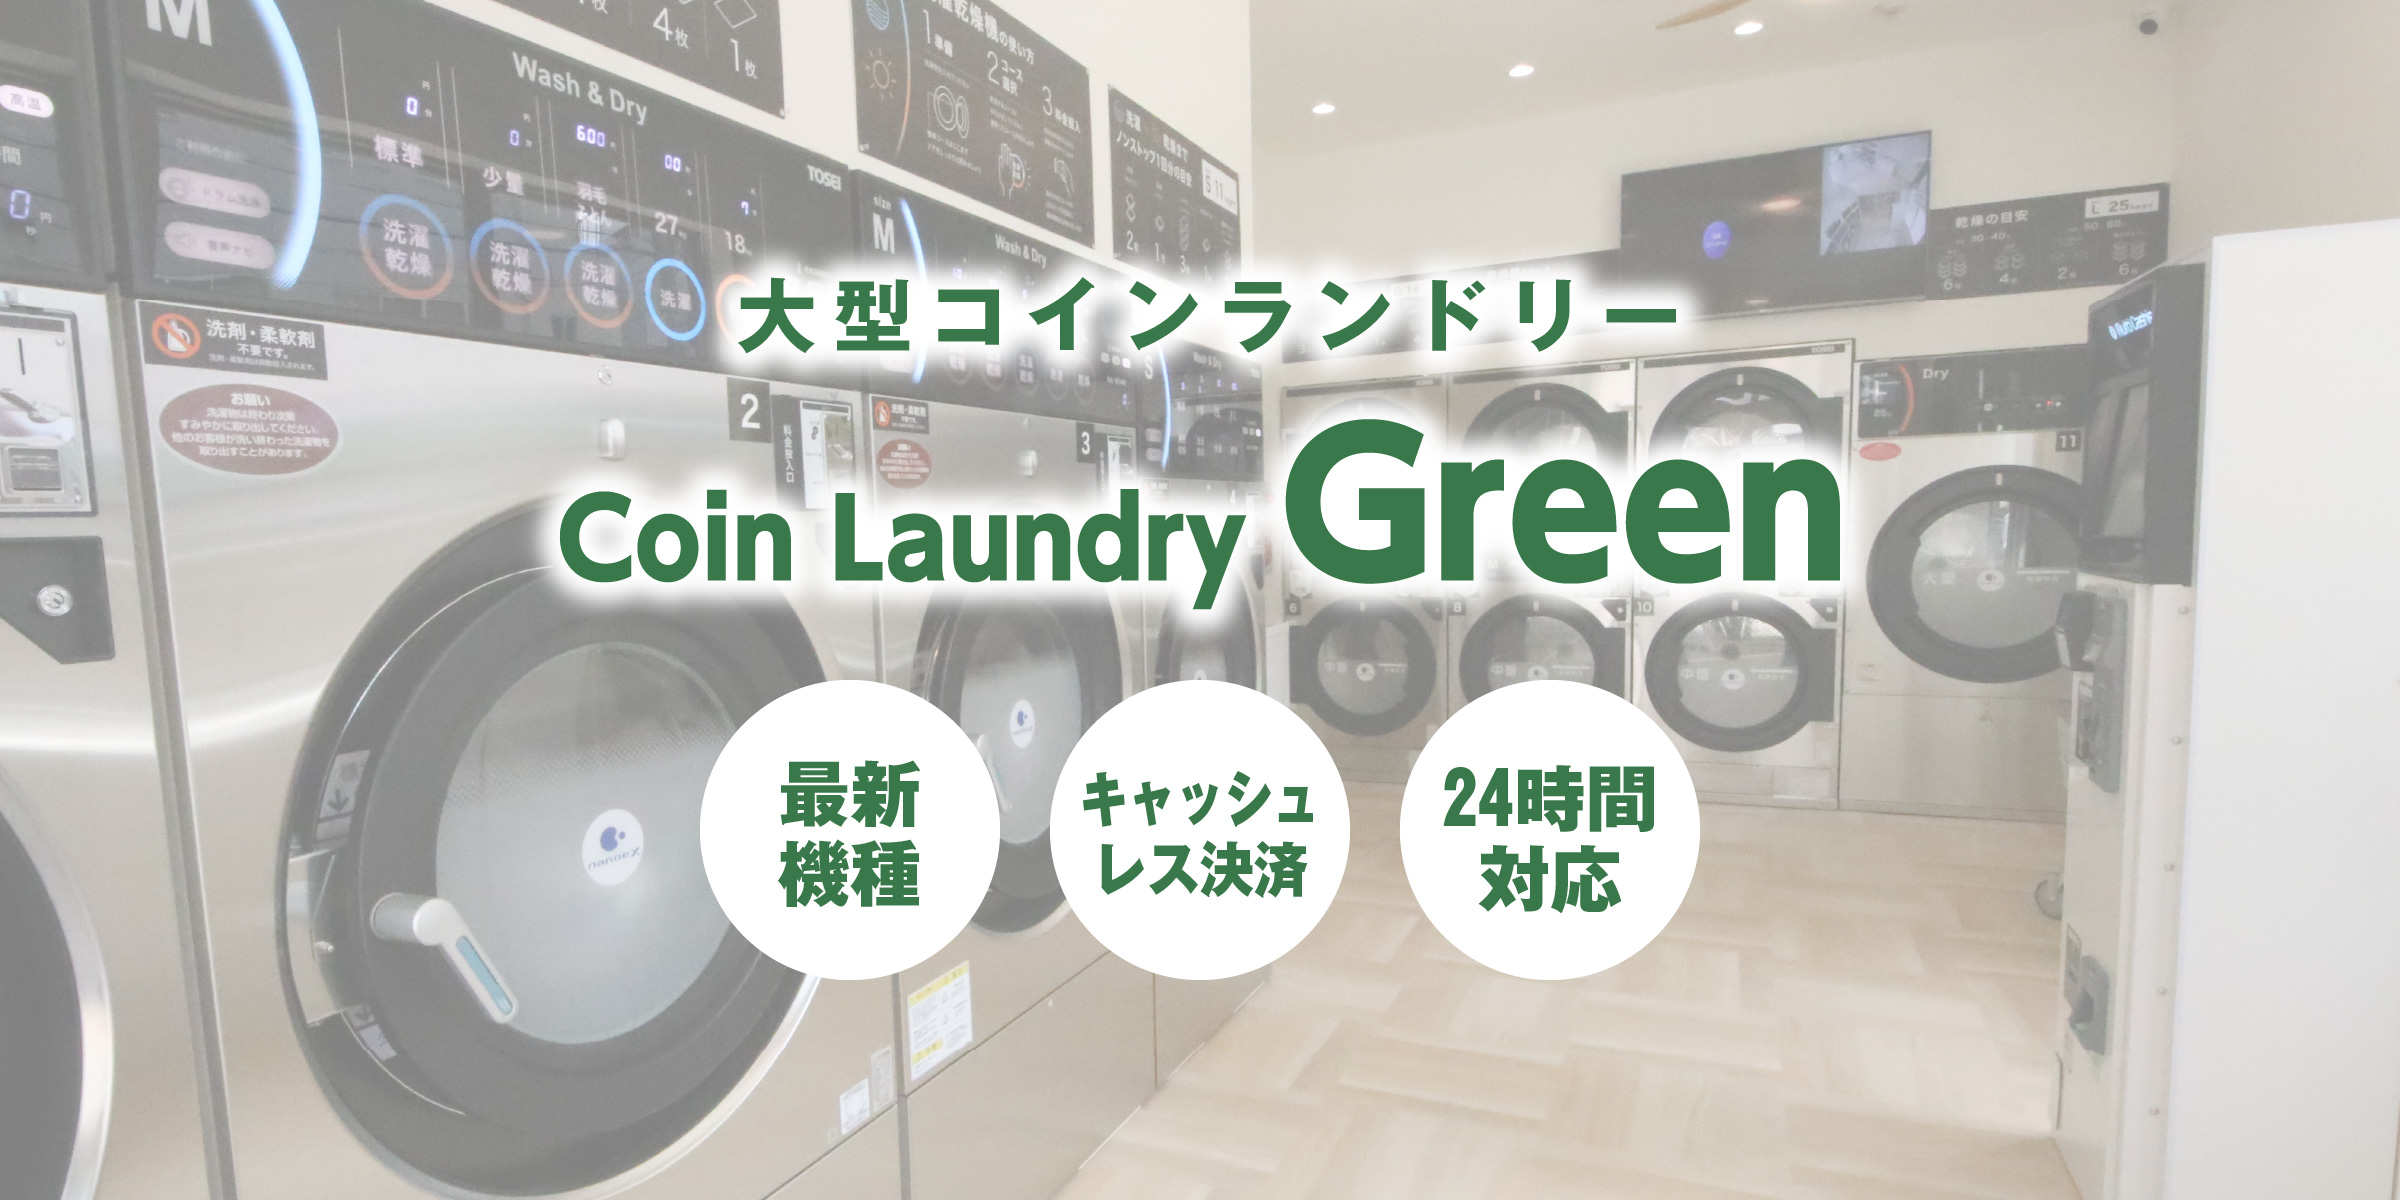 Coin Laundry Green